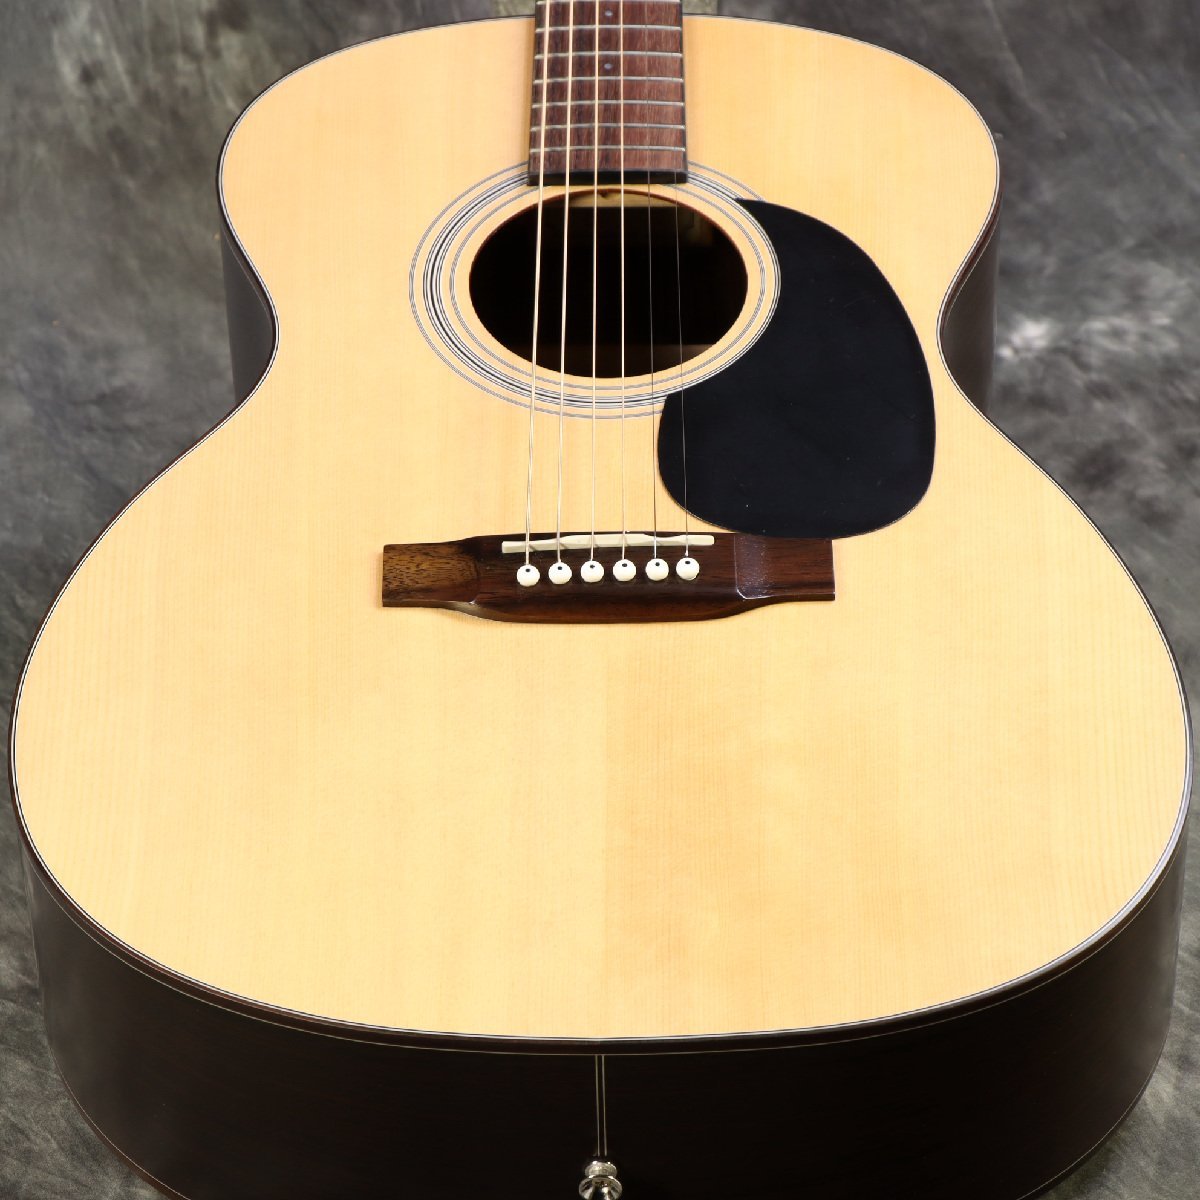 Selva SF1000S Natural Solid Sitka Spruce Top / Rosewood